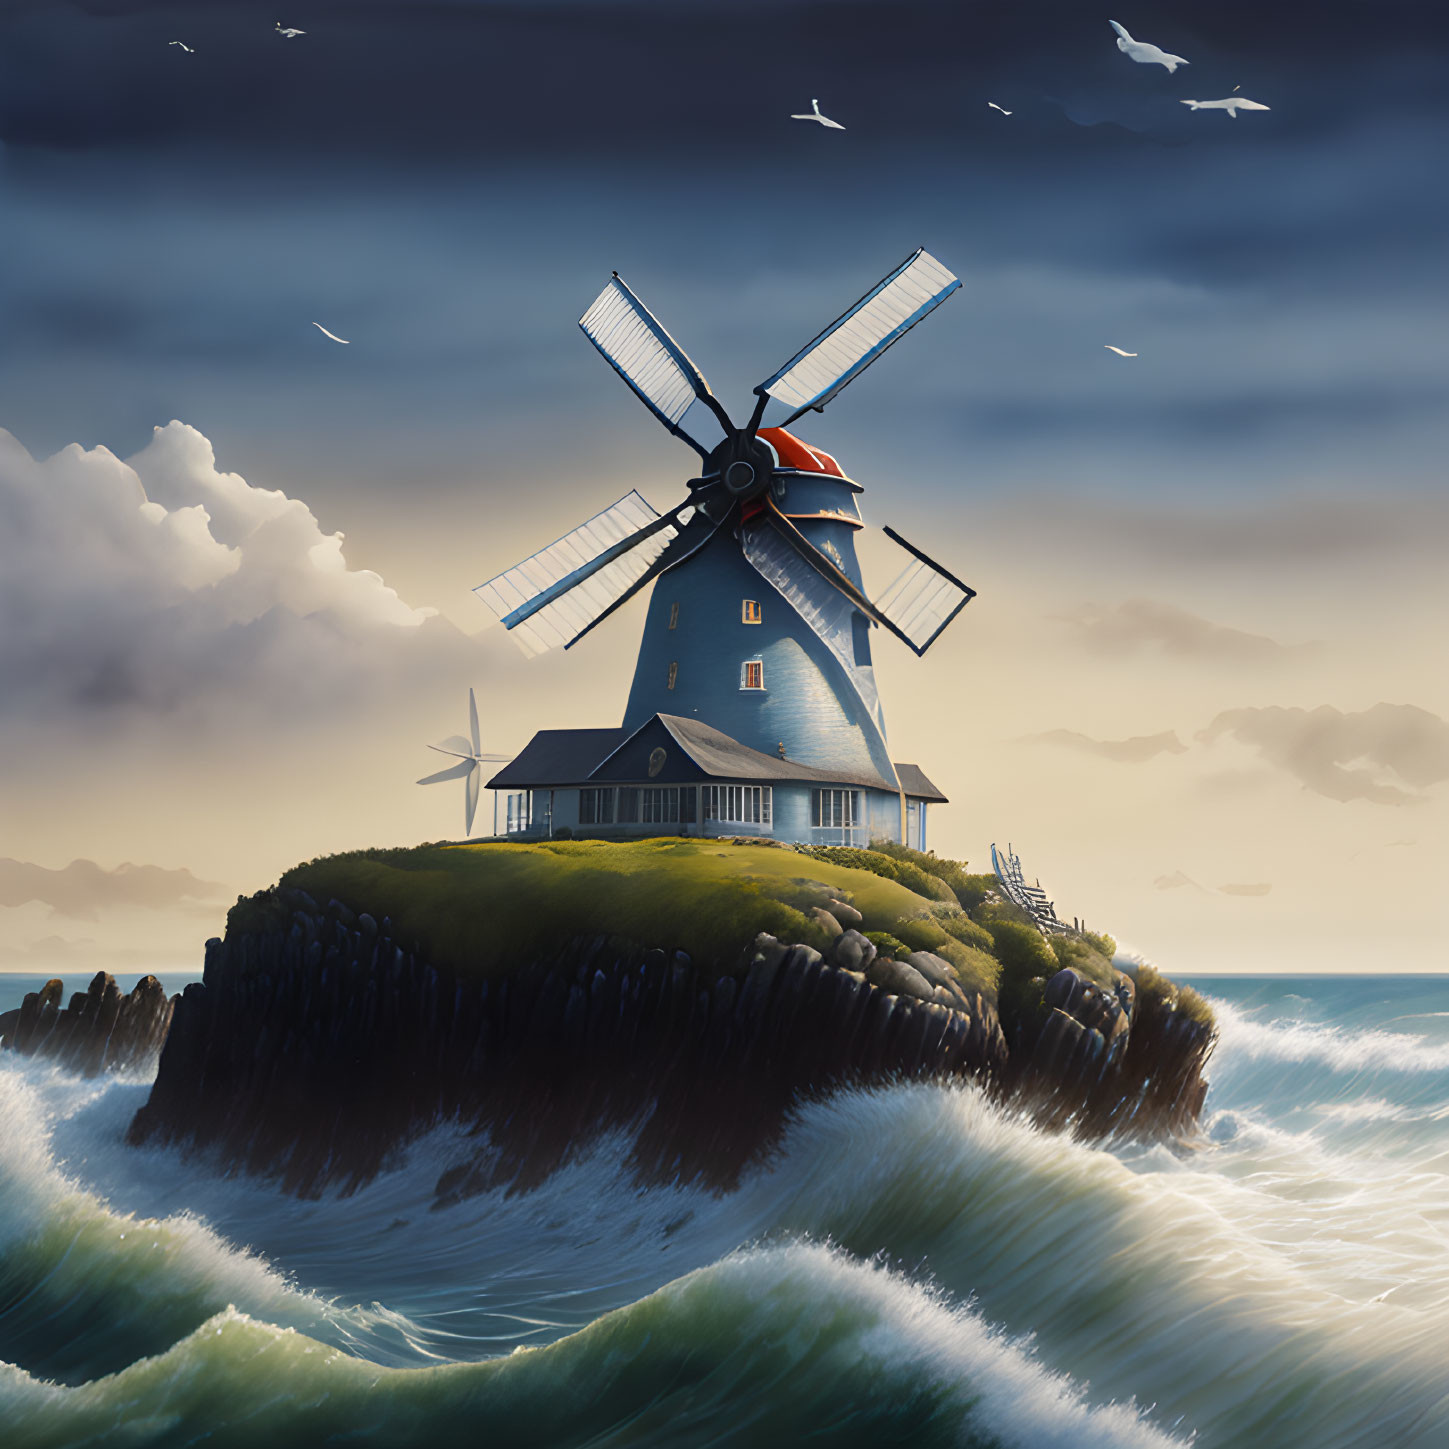 Traditional windmill on cliff with turbulent seas, birds, and cloudy sky at dusk